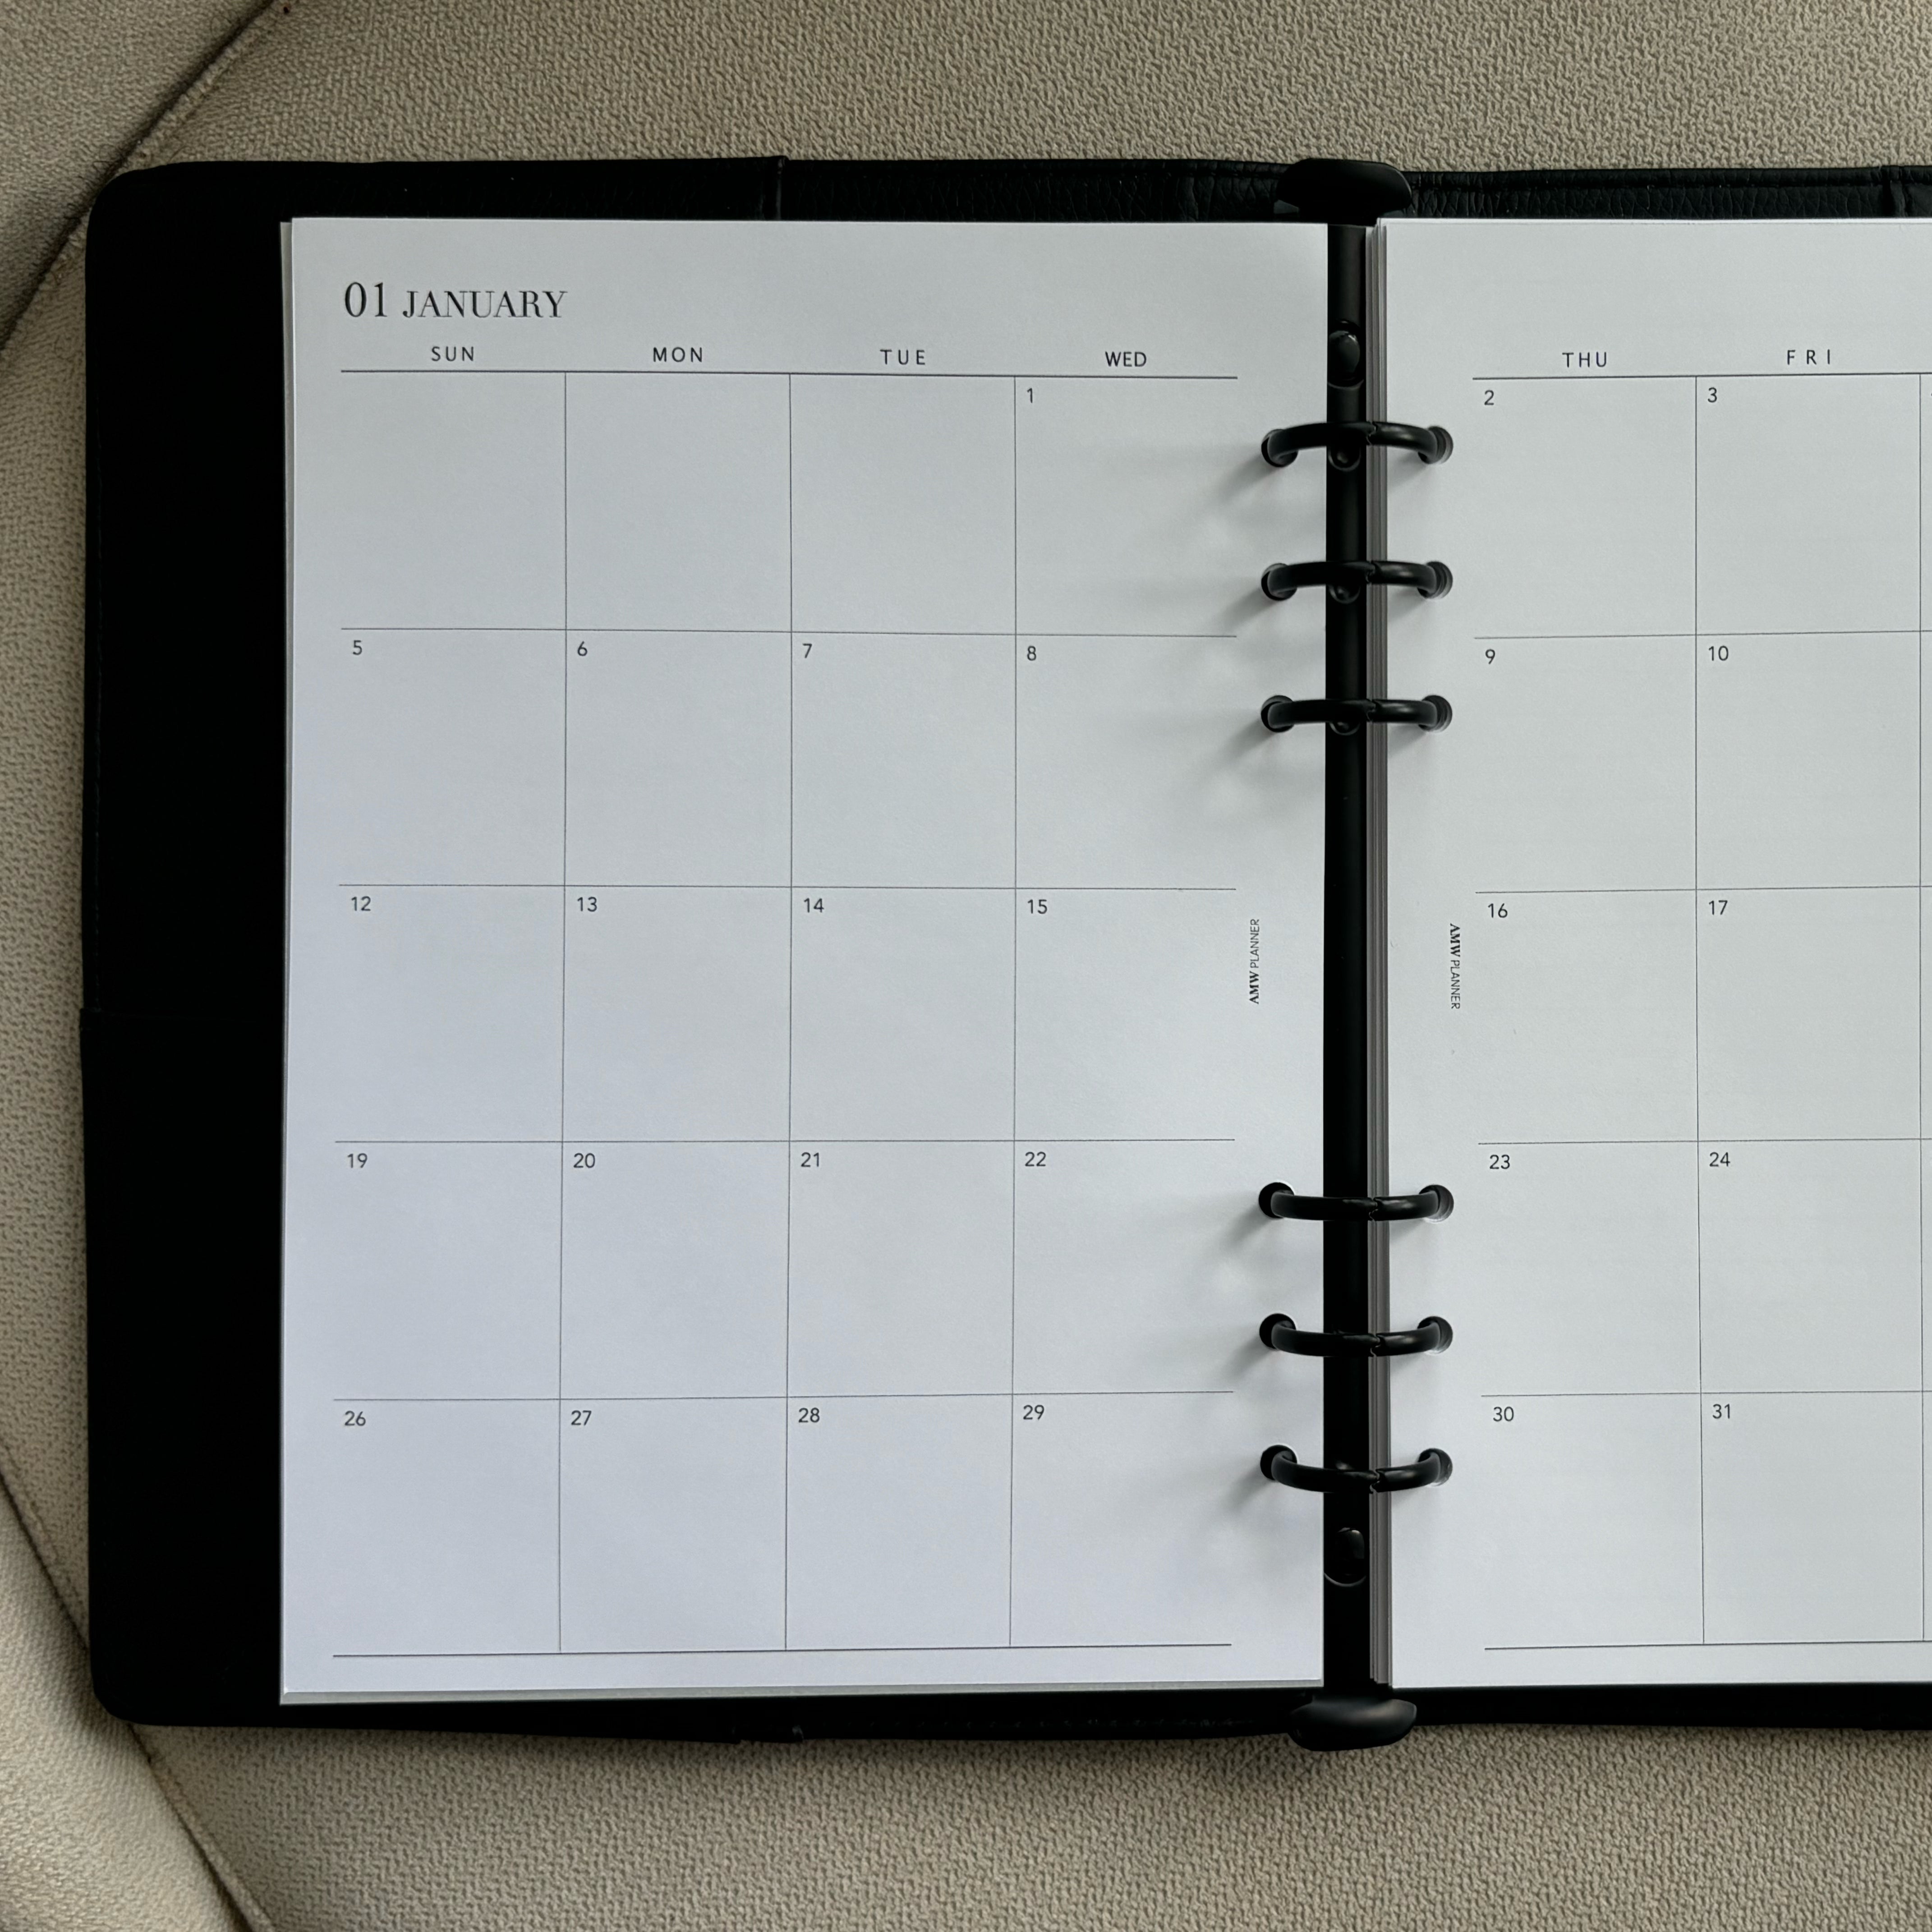 2025 Monthly Planner